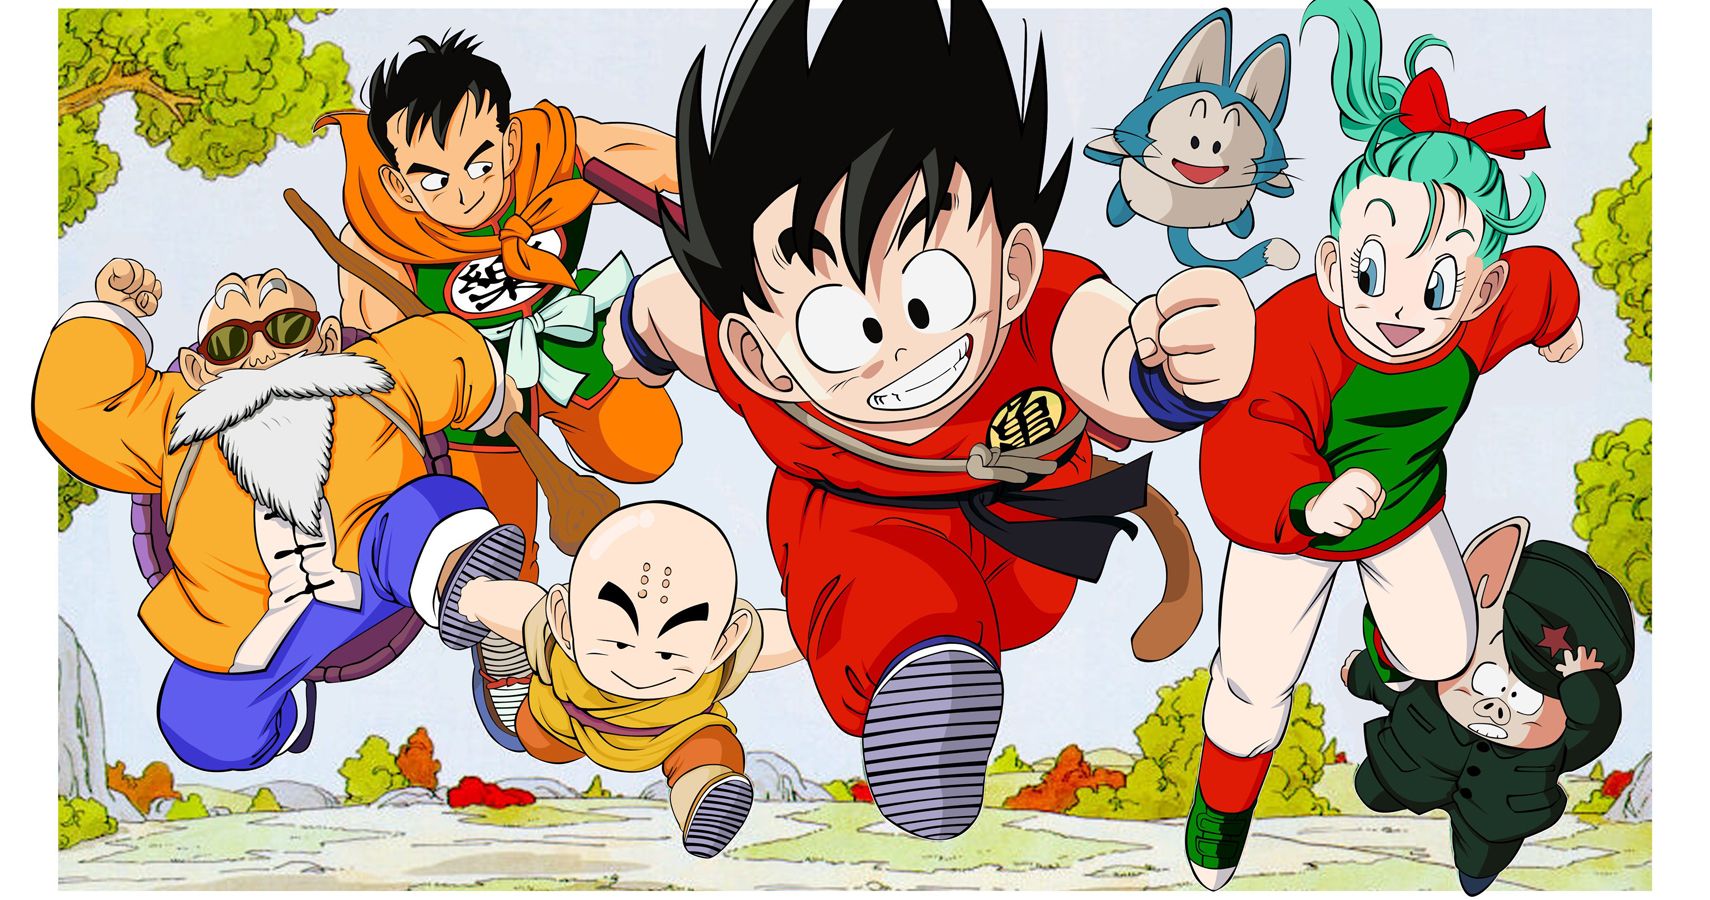 Disney Might Be Making A LiveAction Dragon Ball Z Movie With An AllAsian Cast